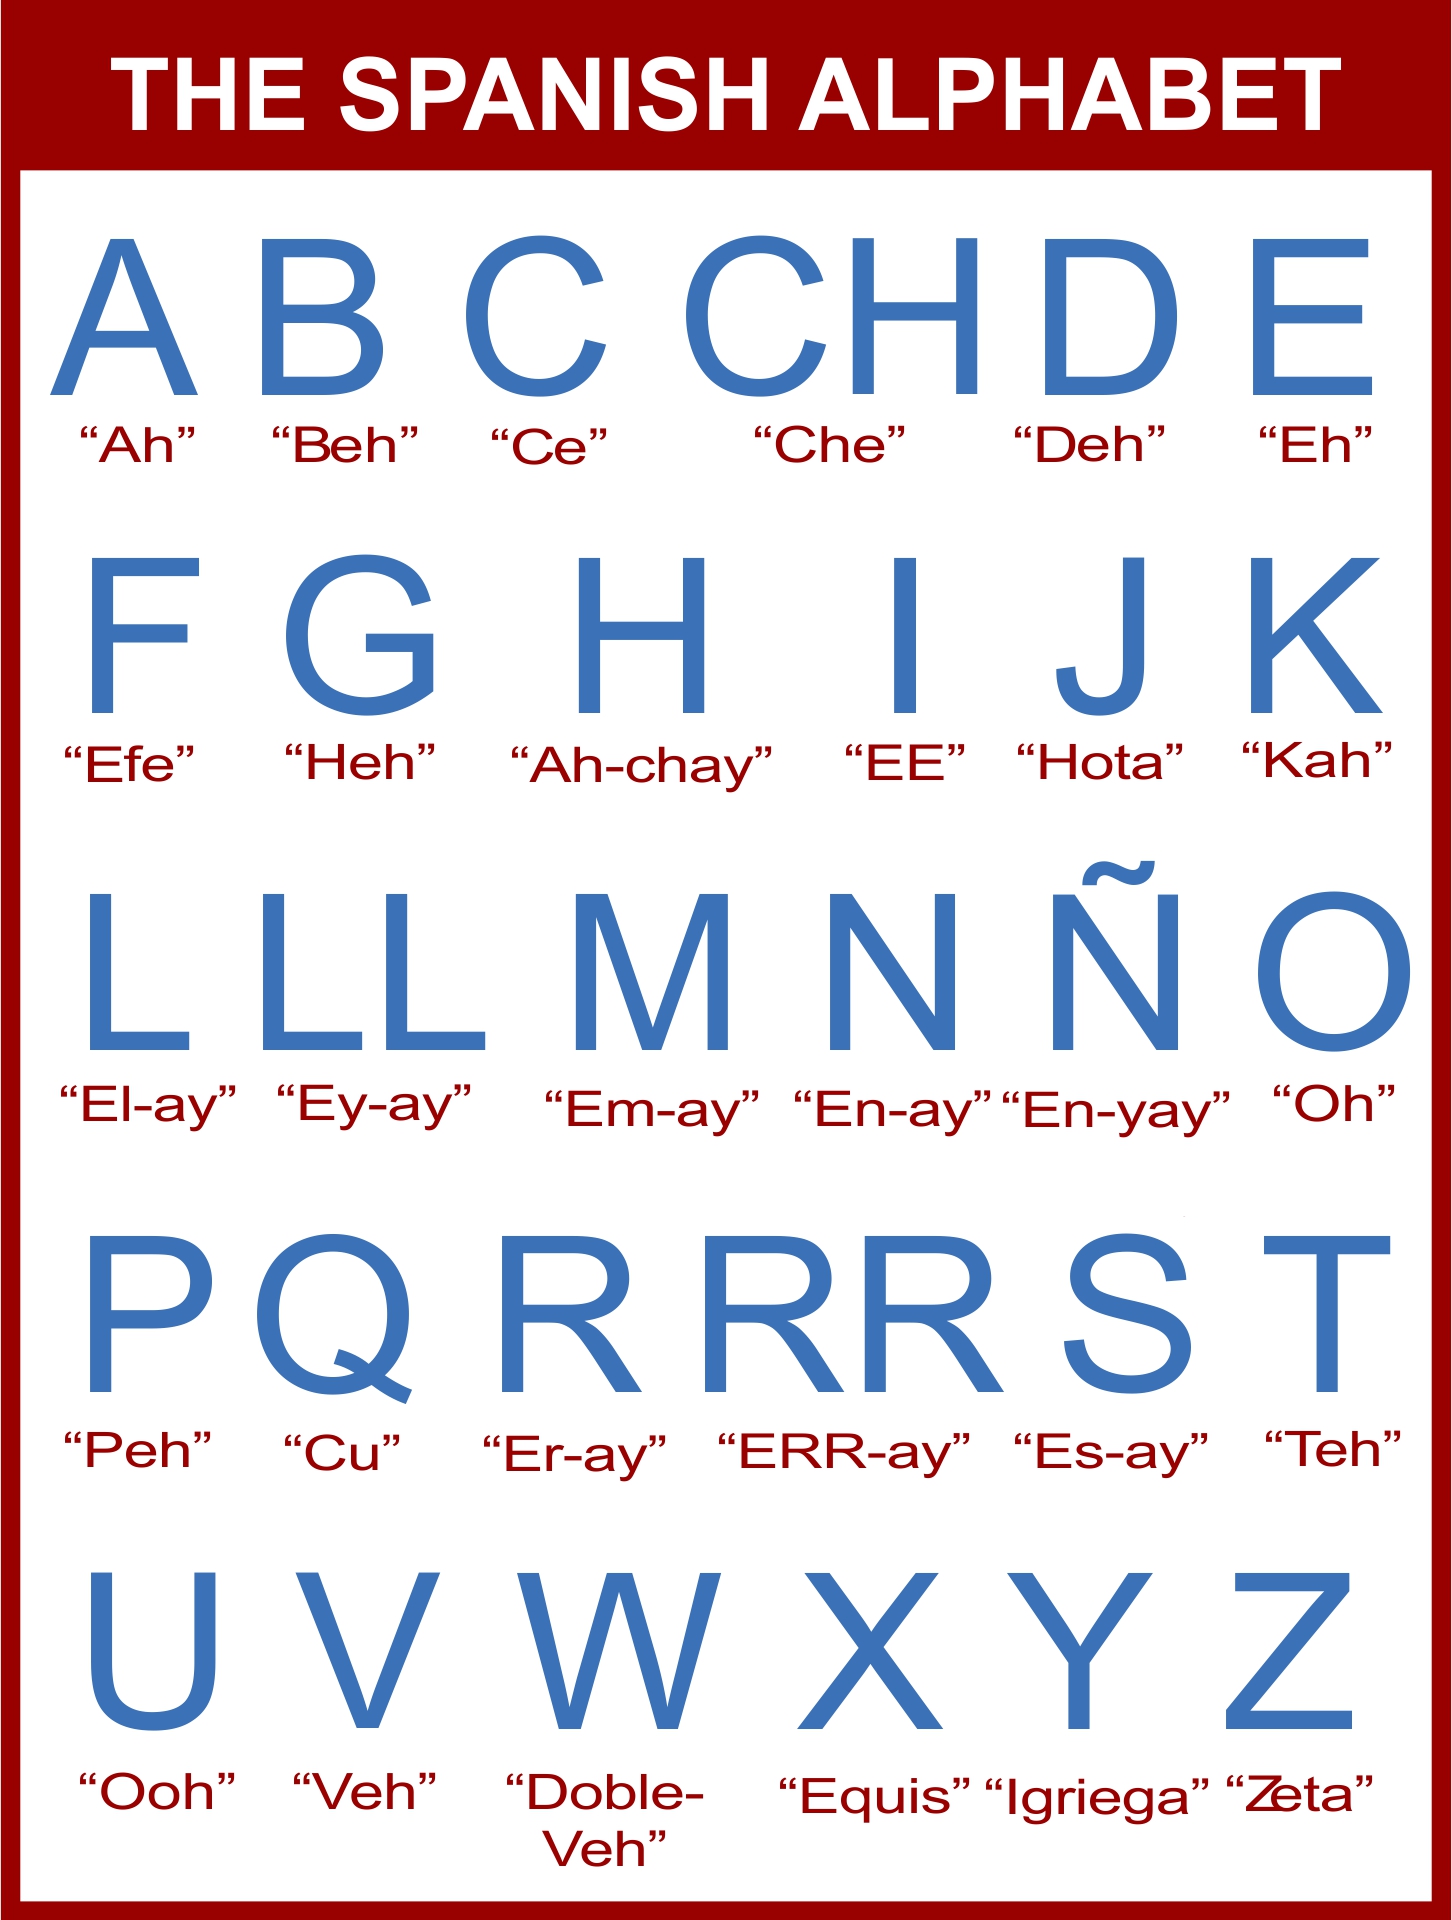 Alphabet Printable Images Gallery Category Page 1 Printablee